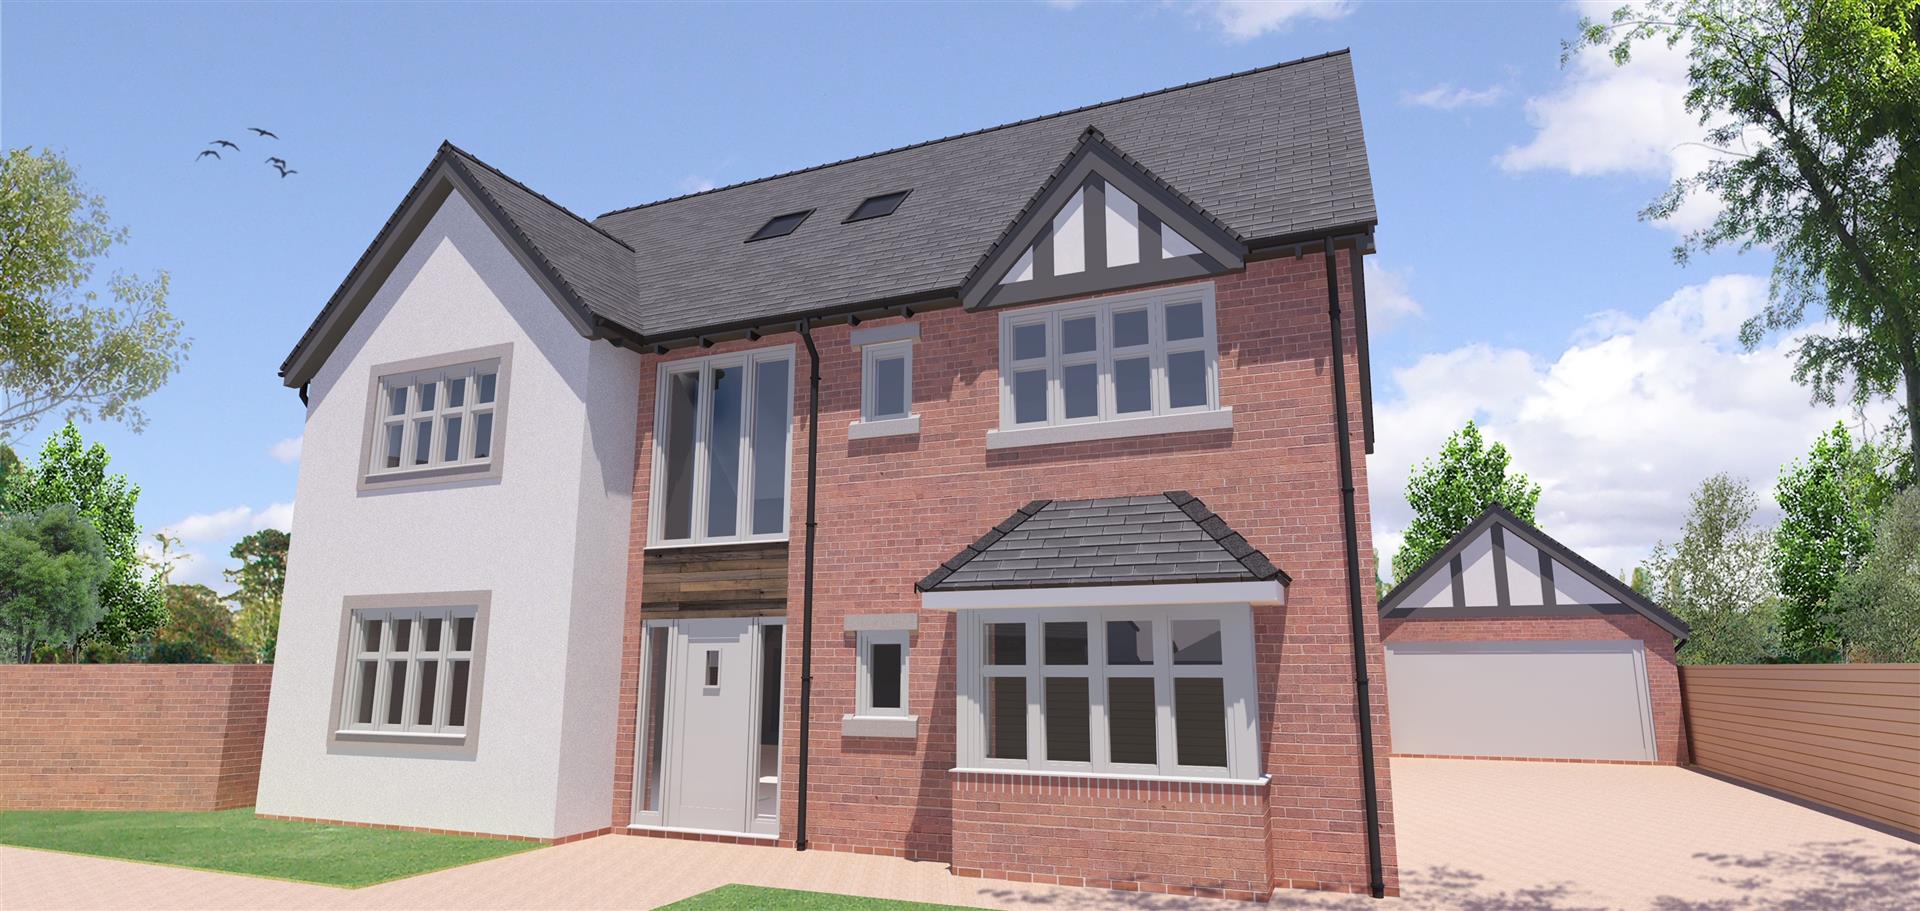 5 bed detached house for sale in Birchy Leasowes Lane, Solihull 0